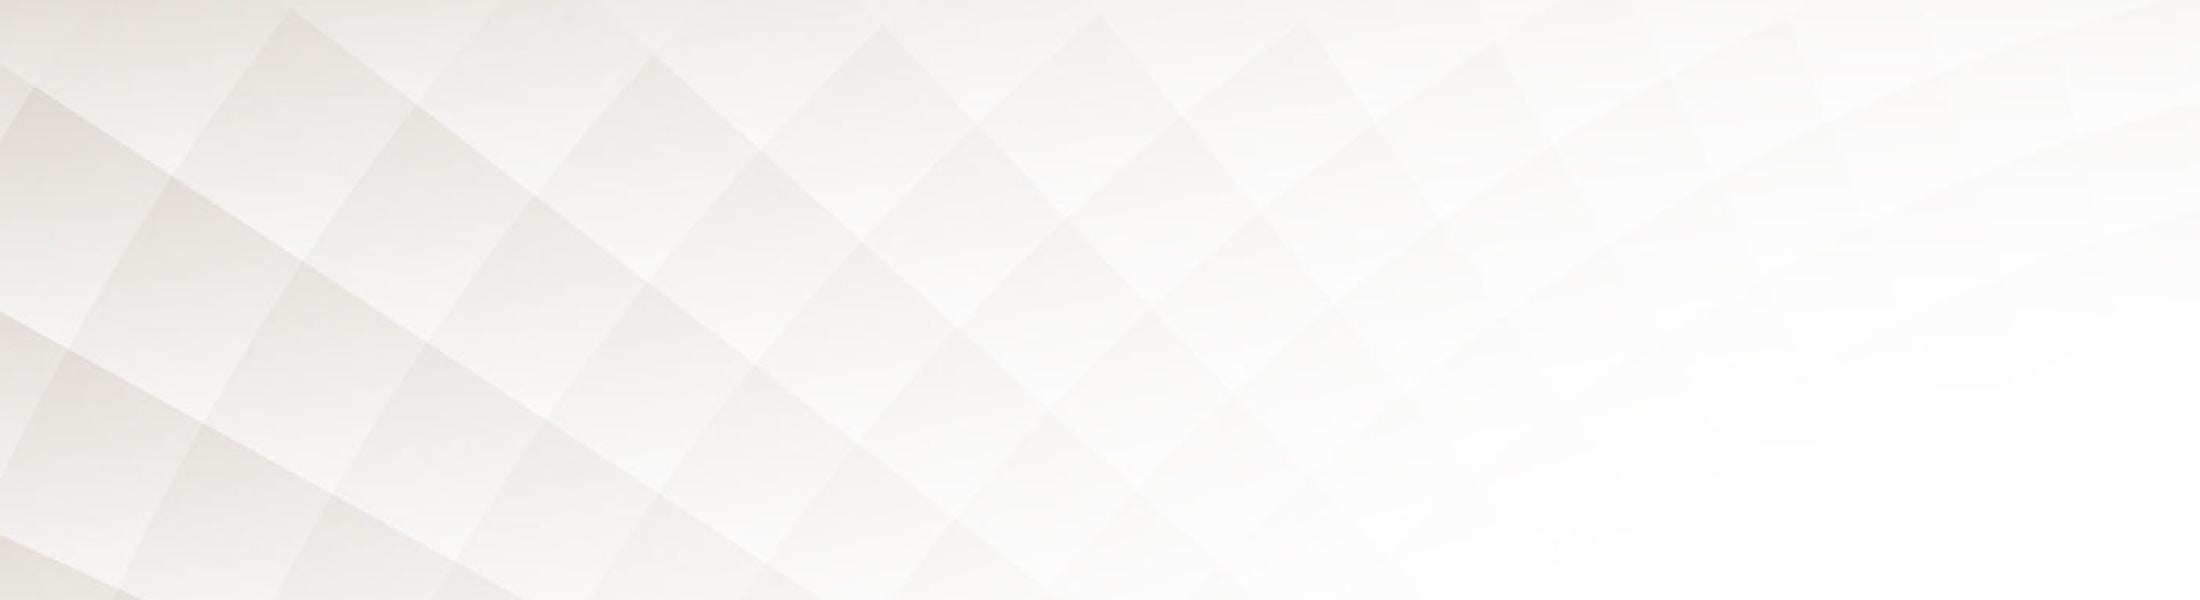 Abstract white header